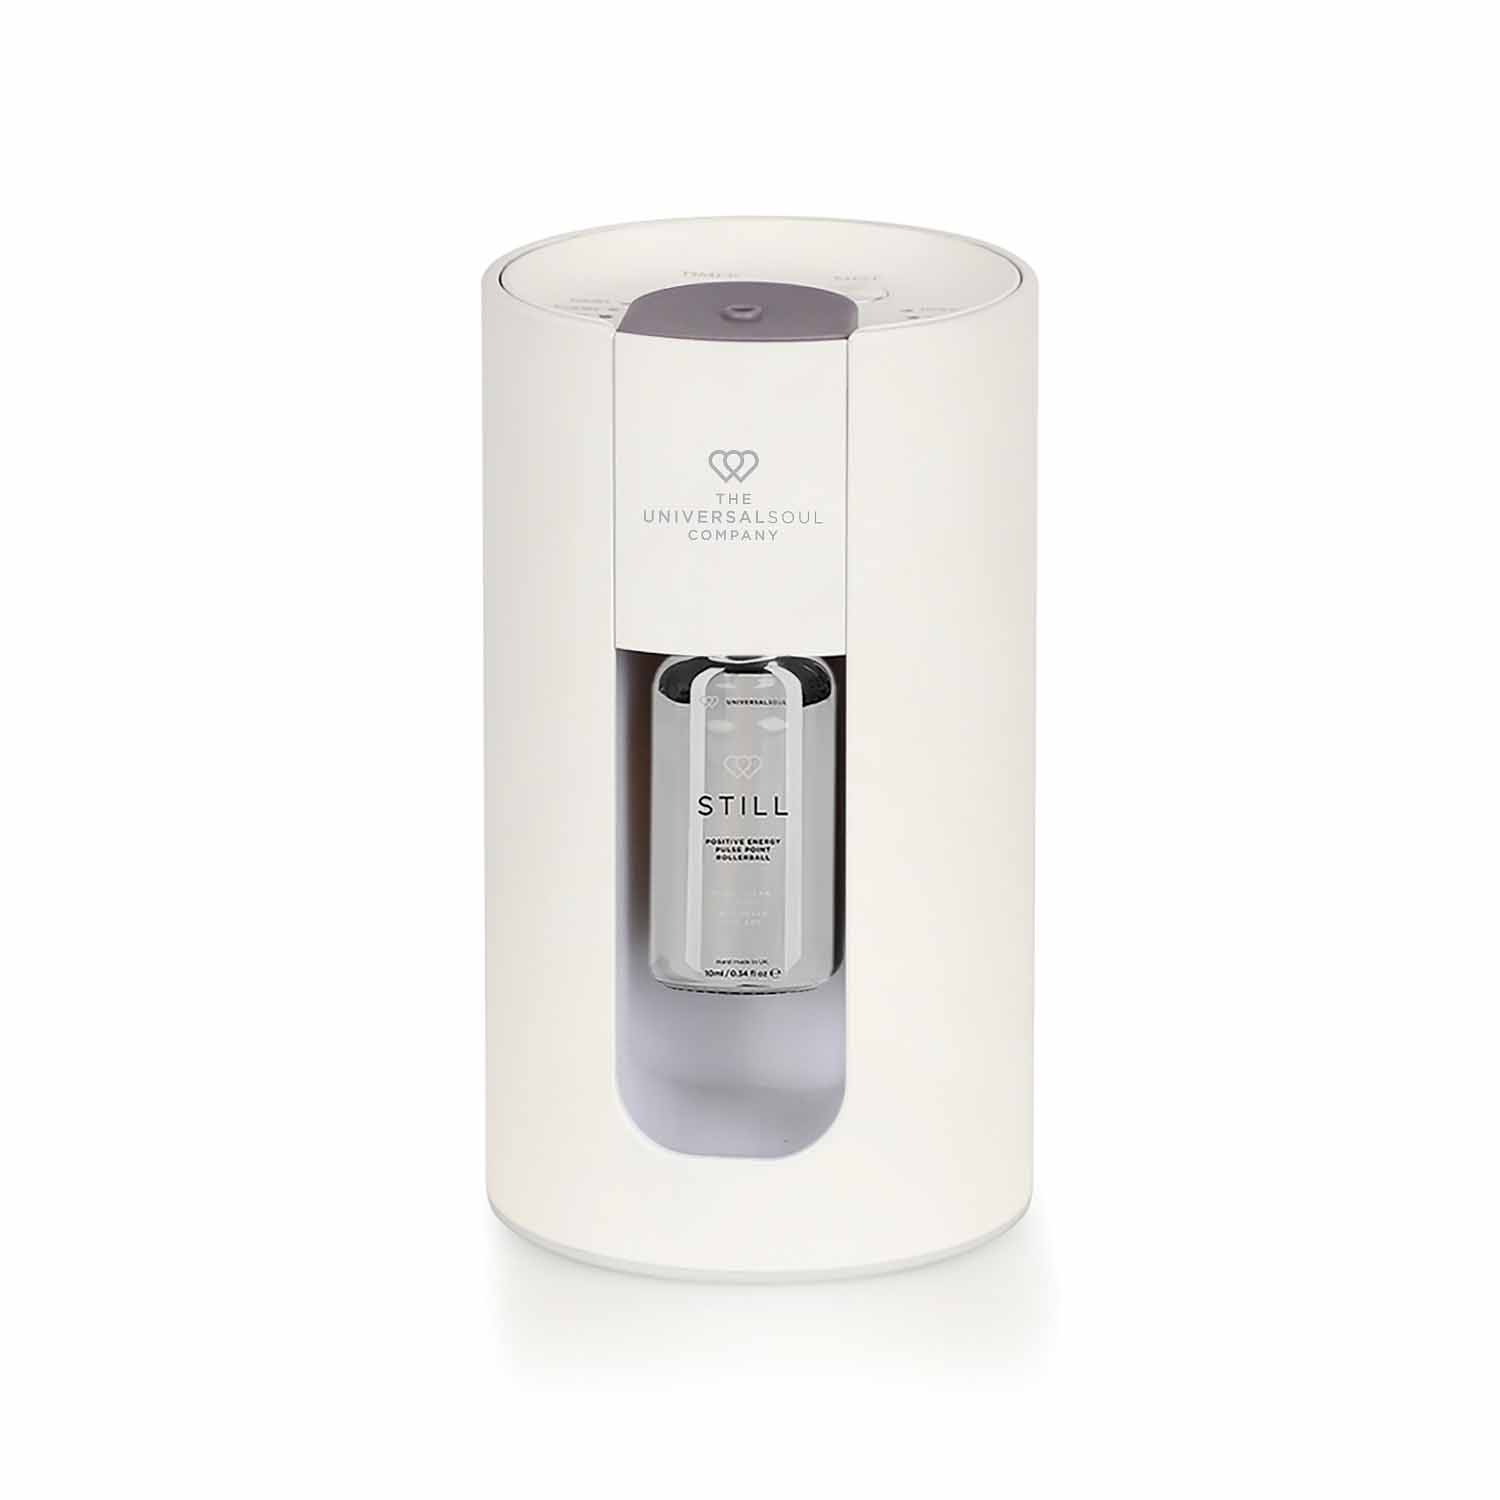 Positive Energy Waterless Nano Nebulizing Aroma Diffuser Pulsa with oils - The Universal Soul Company